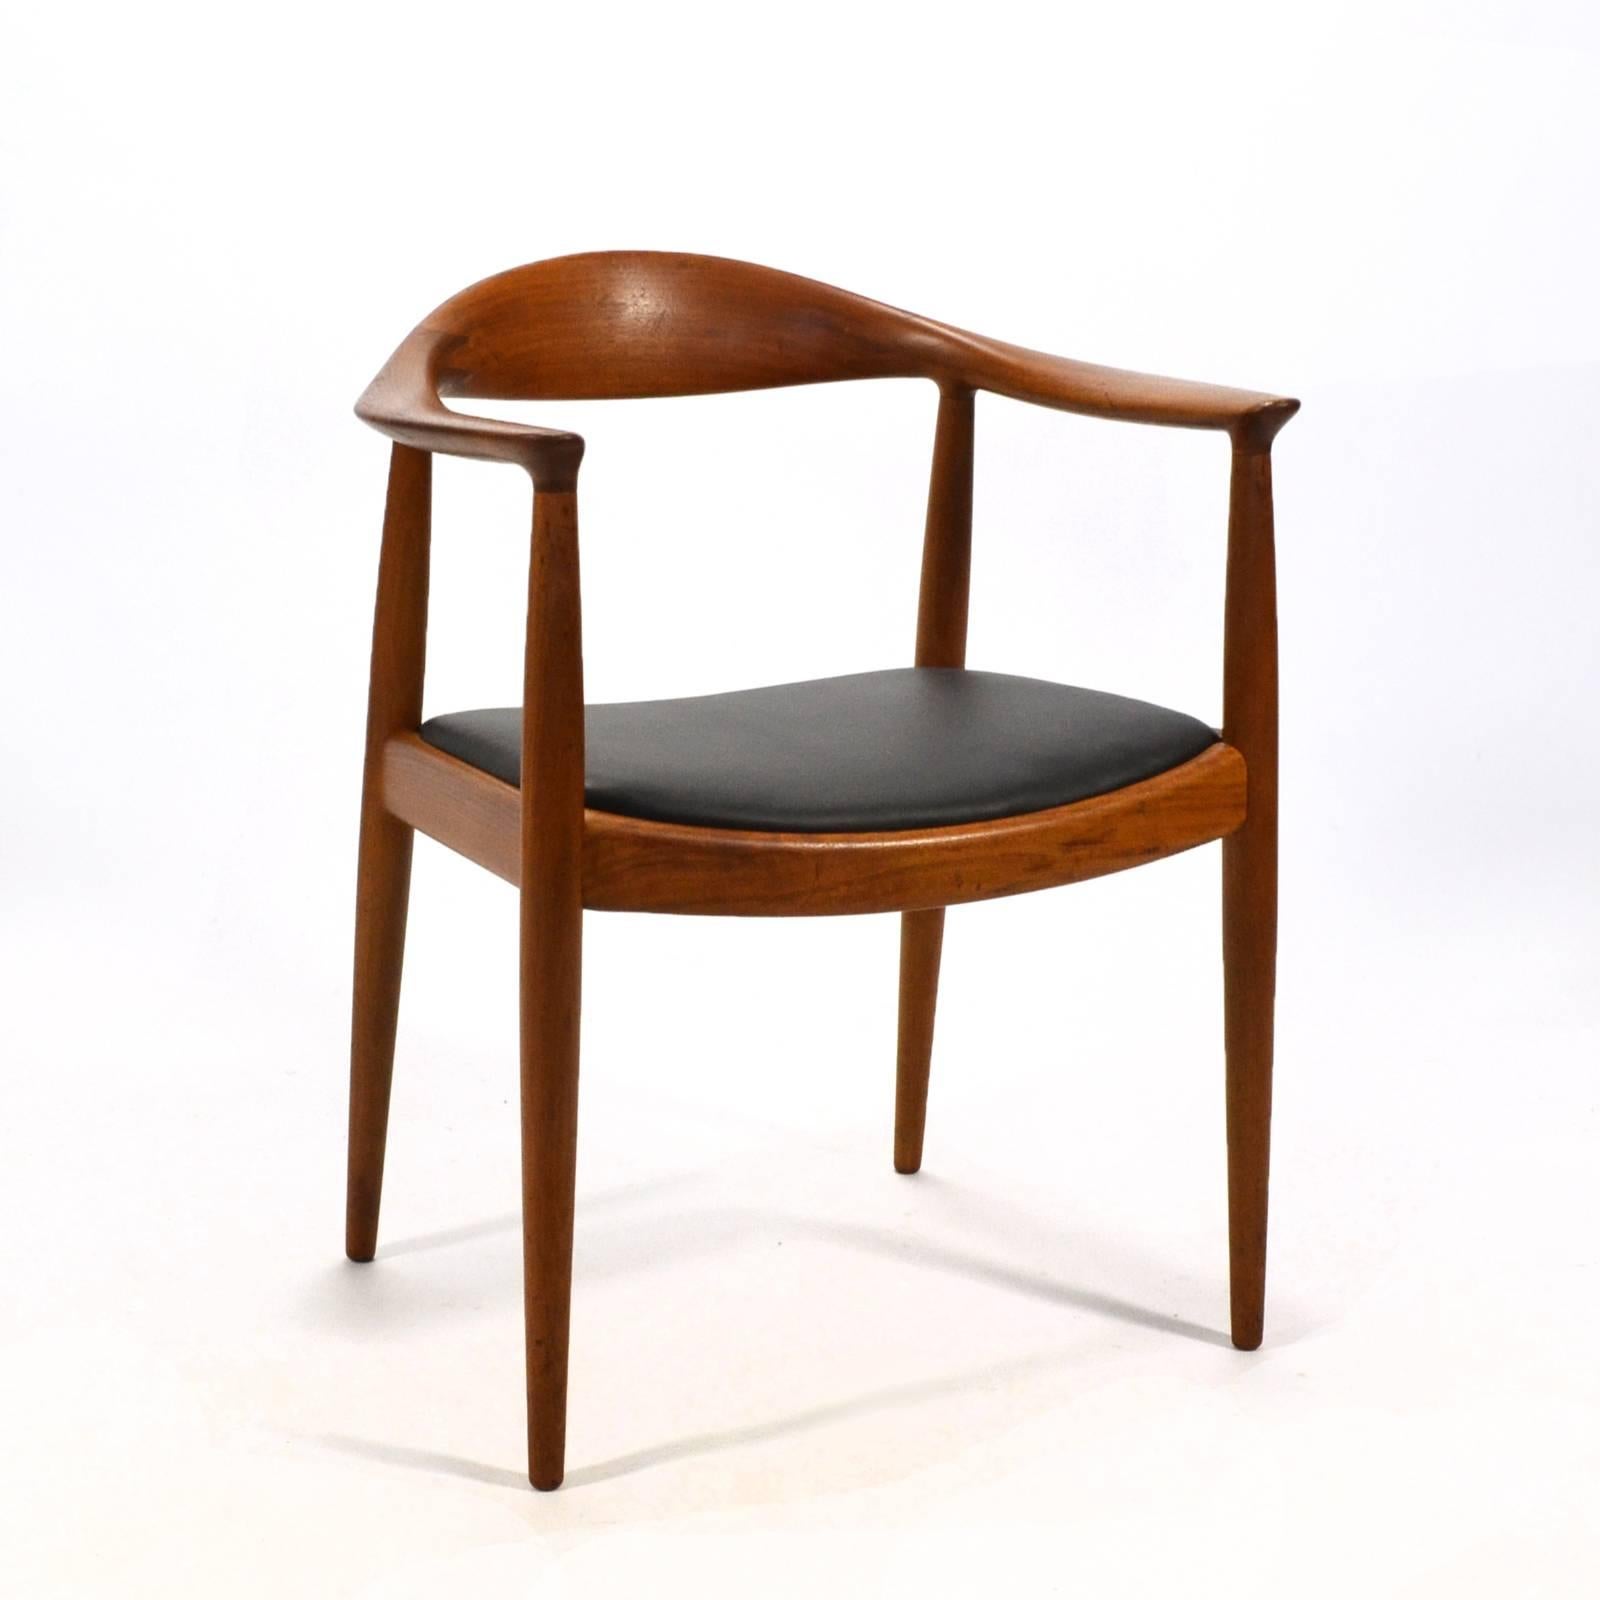 Arguably the most important and best realized of Hans Wegner’s chairs, the round back or “The Chair” was designed in 1948. Exquisitely constructed by cabinetmaker Johannes Hansen it’s subtle beauty is matched by it’s comfort. Made famous in the US